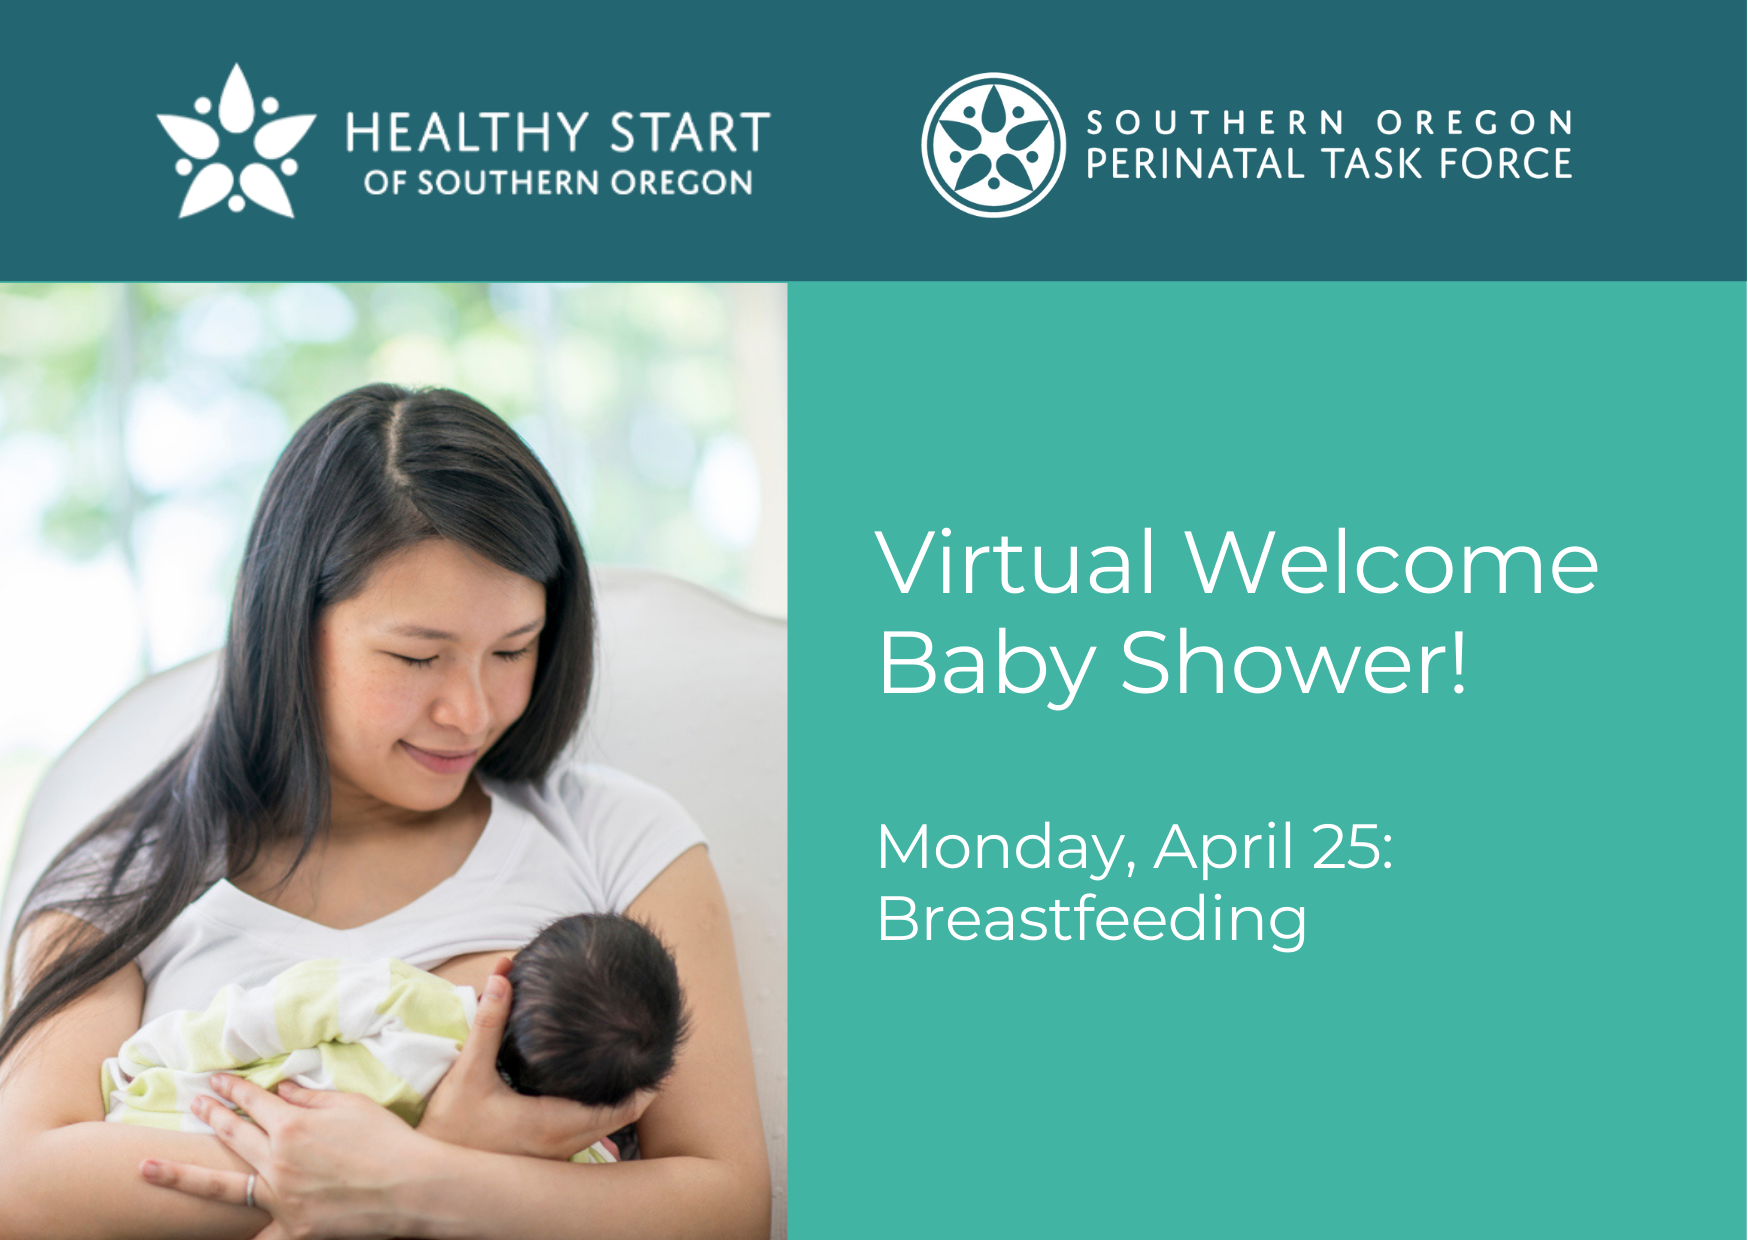 Welcome Baby Shower: Monday April 25, 2022 - Breastfeeding